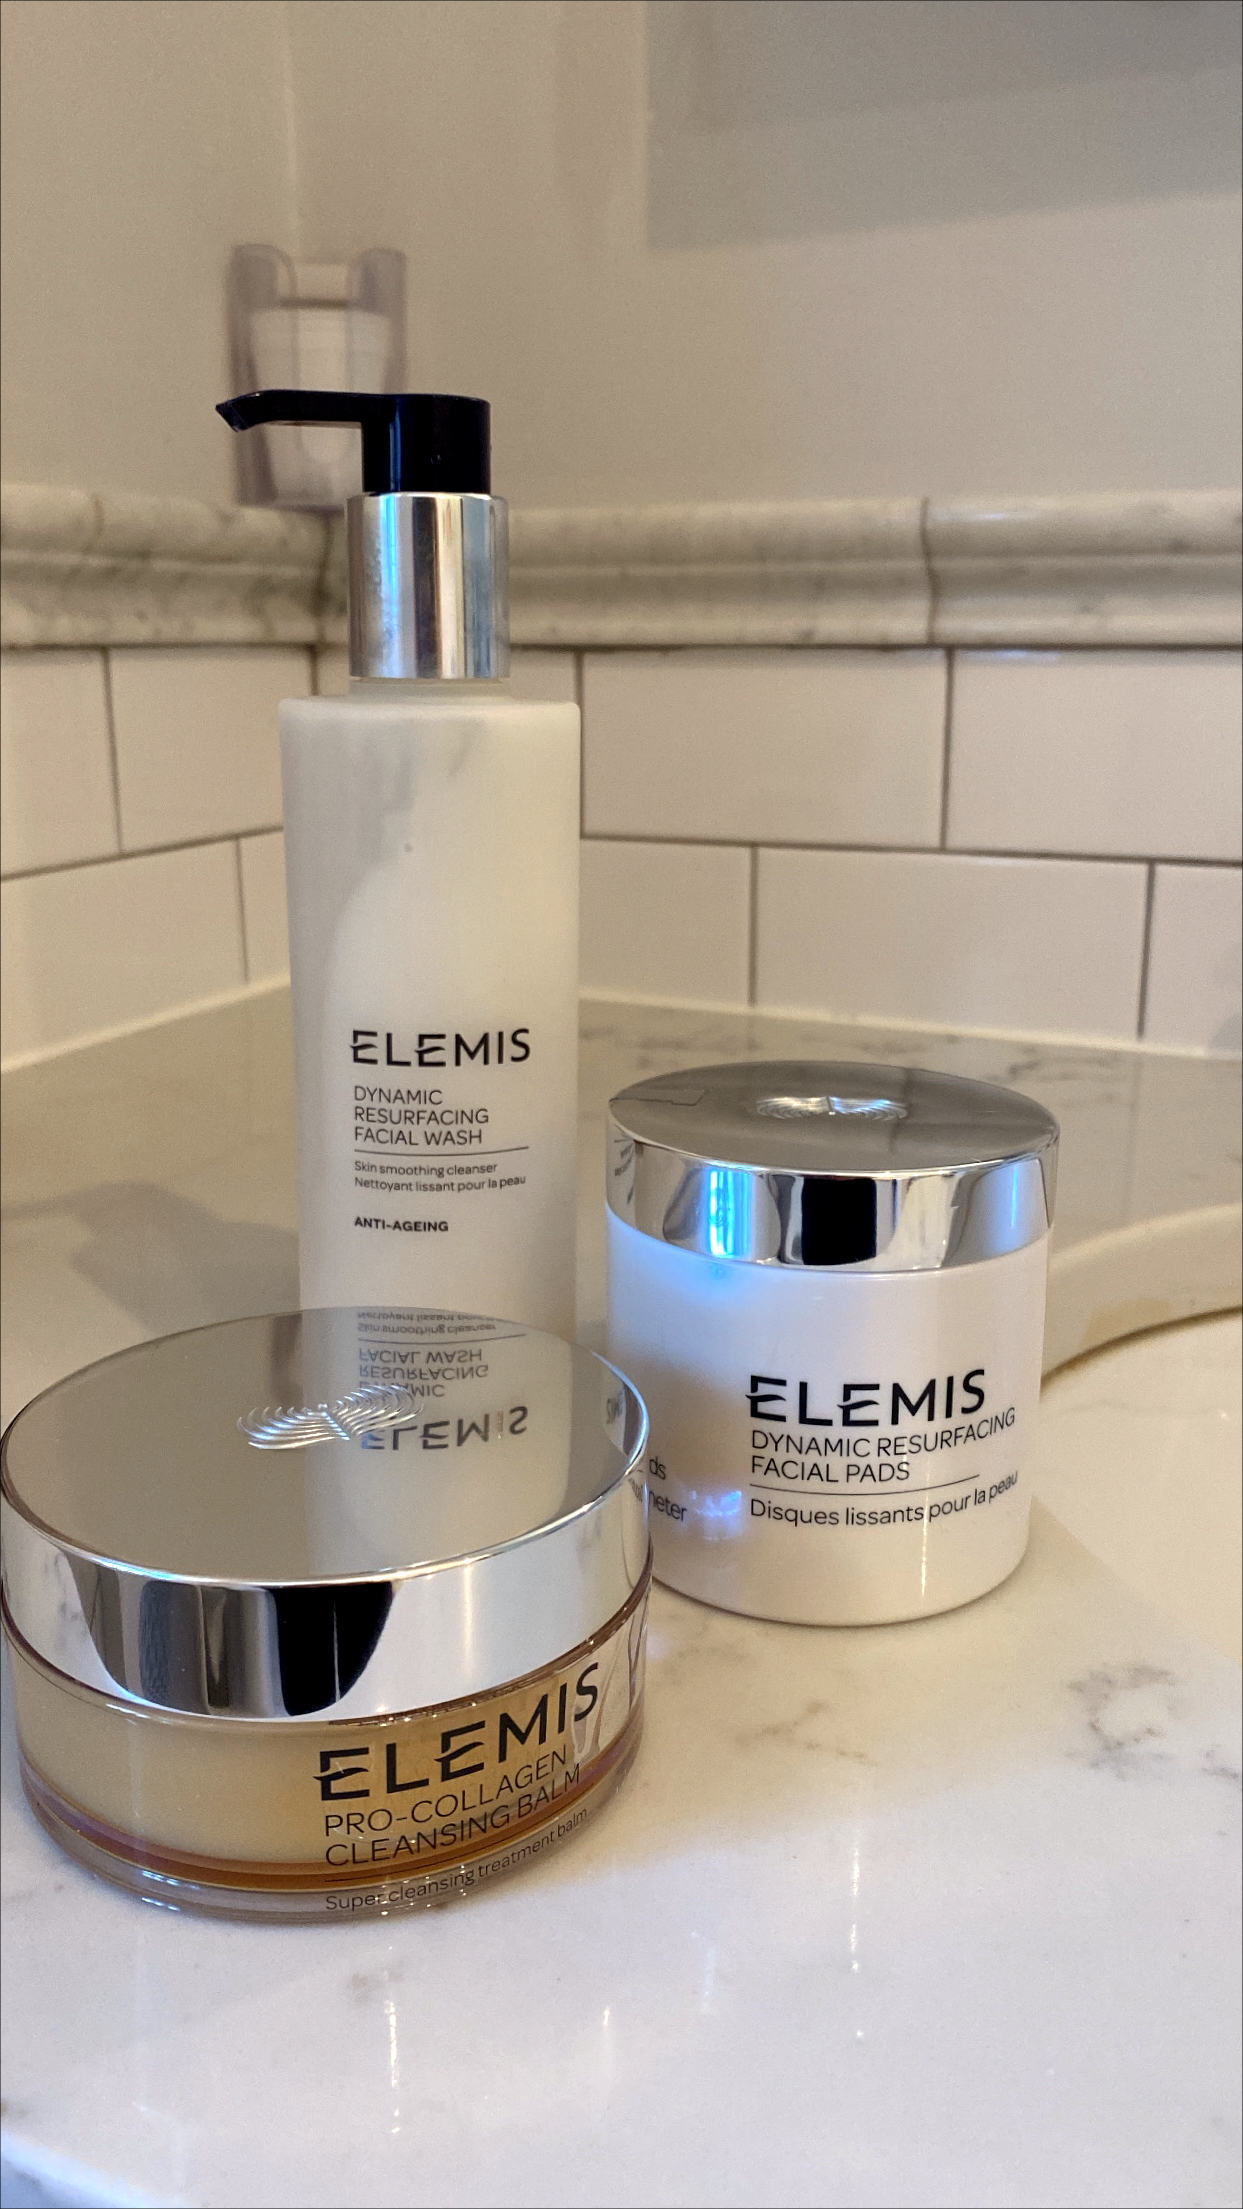 Elemis skincare products from Amazon Prime Sale